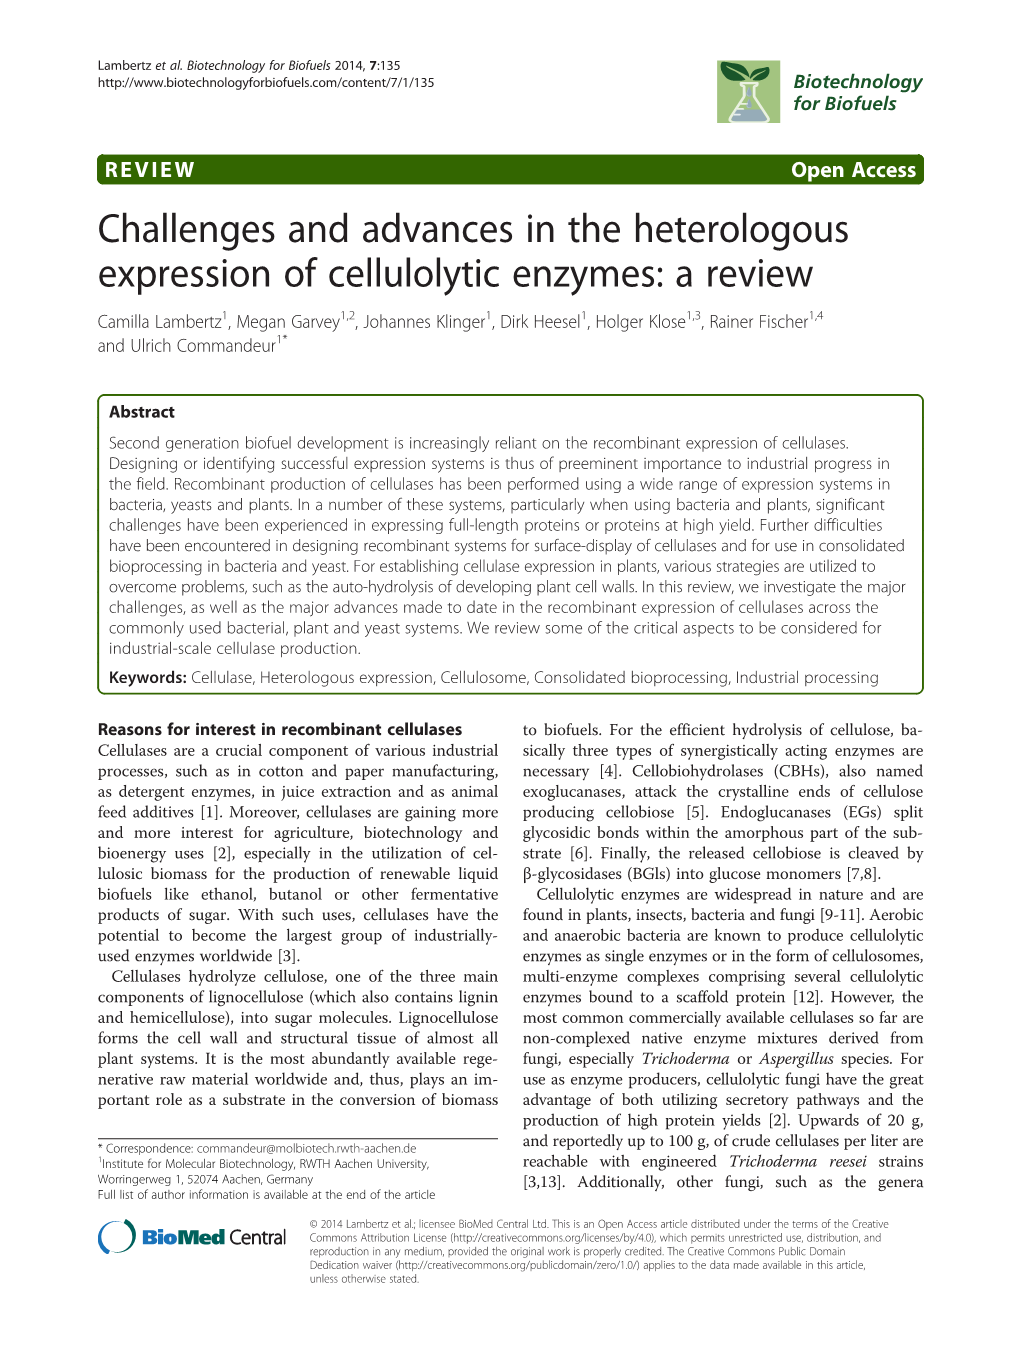 Challenges and Advances in the Heterologous Expression Of